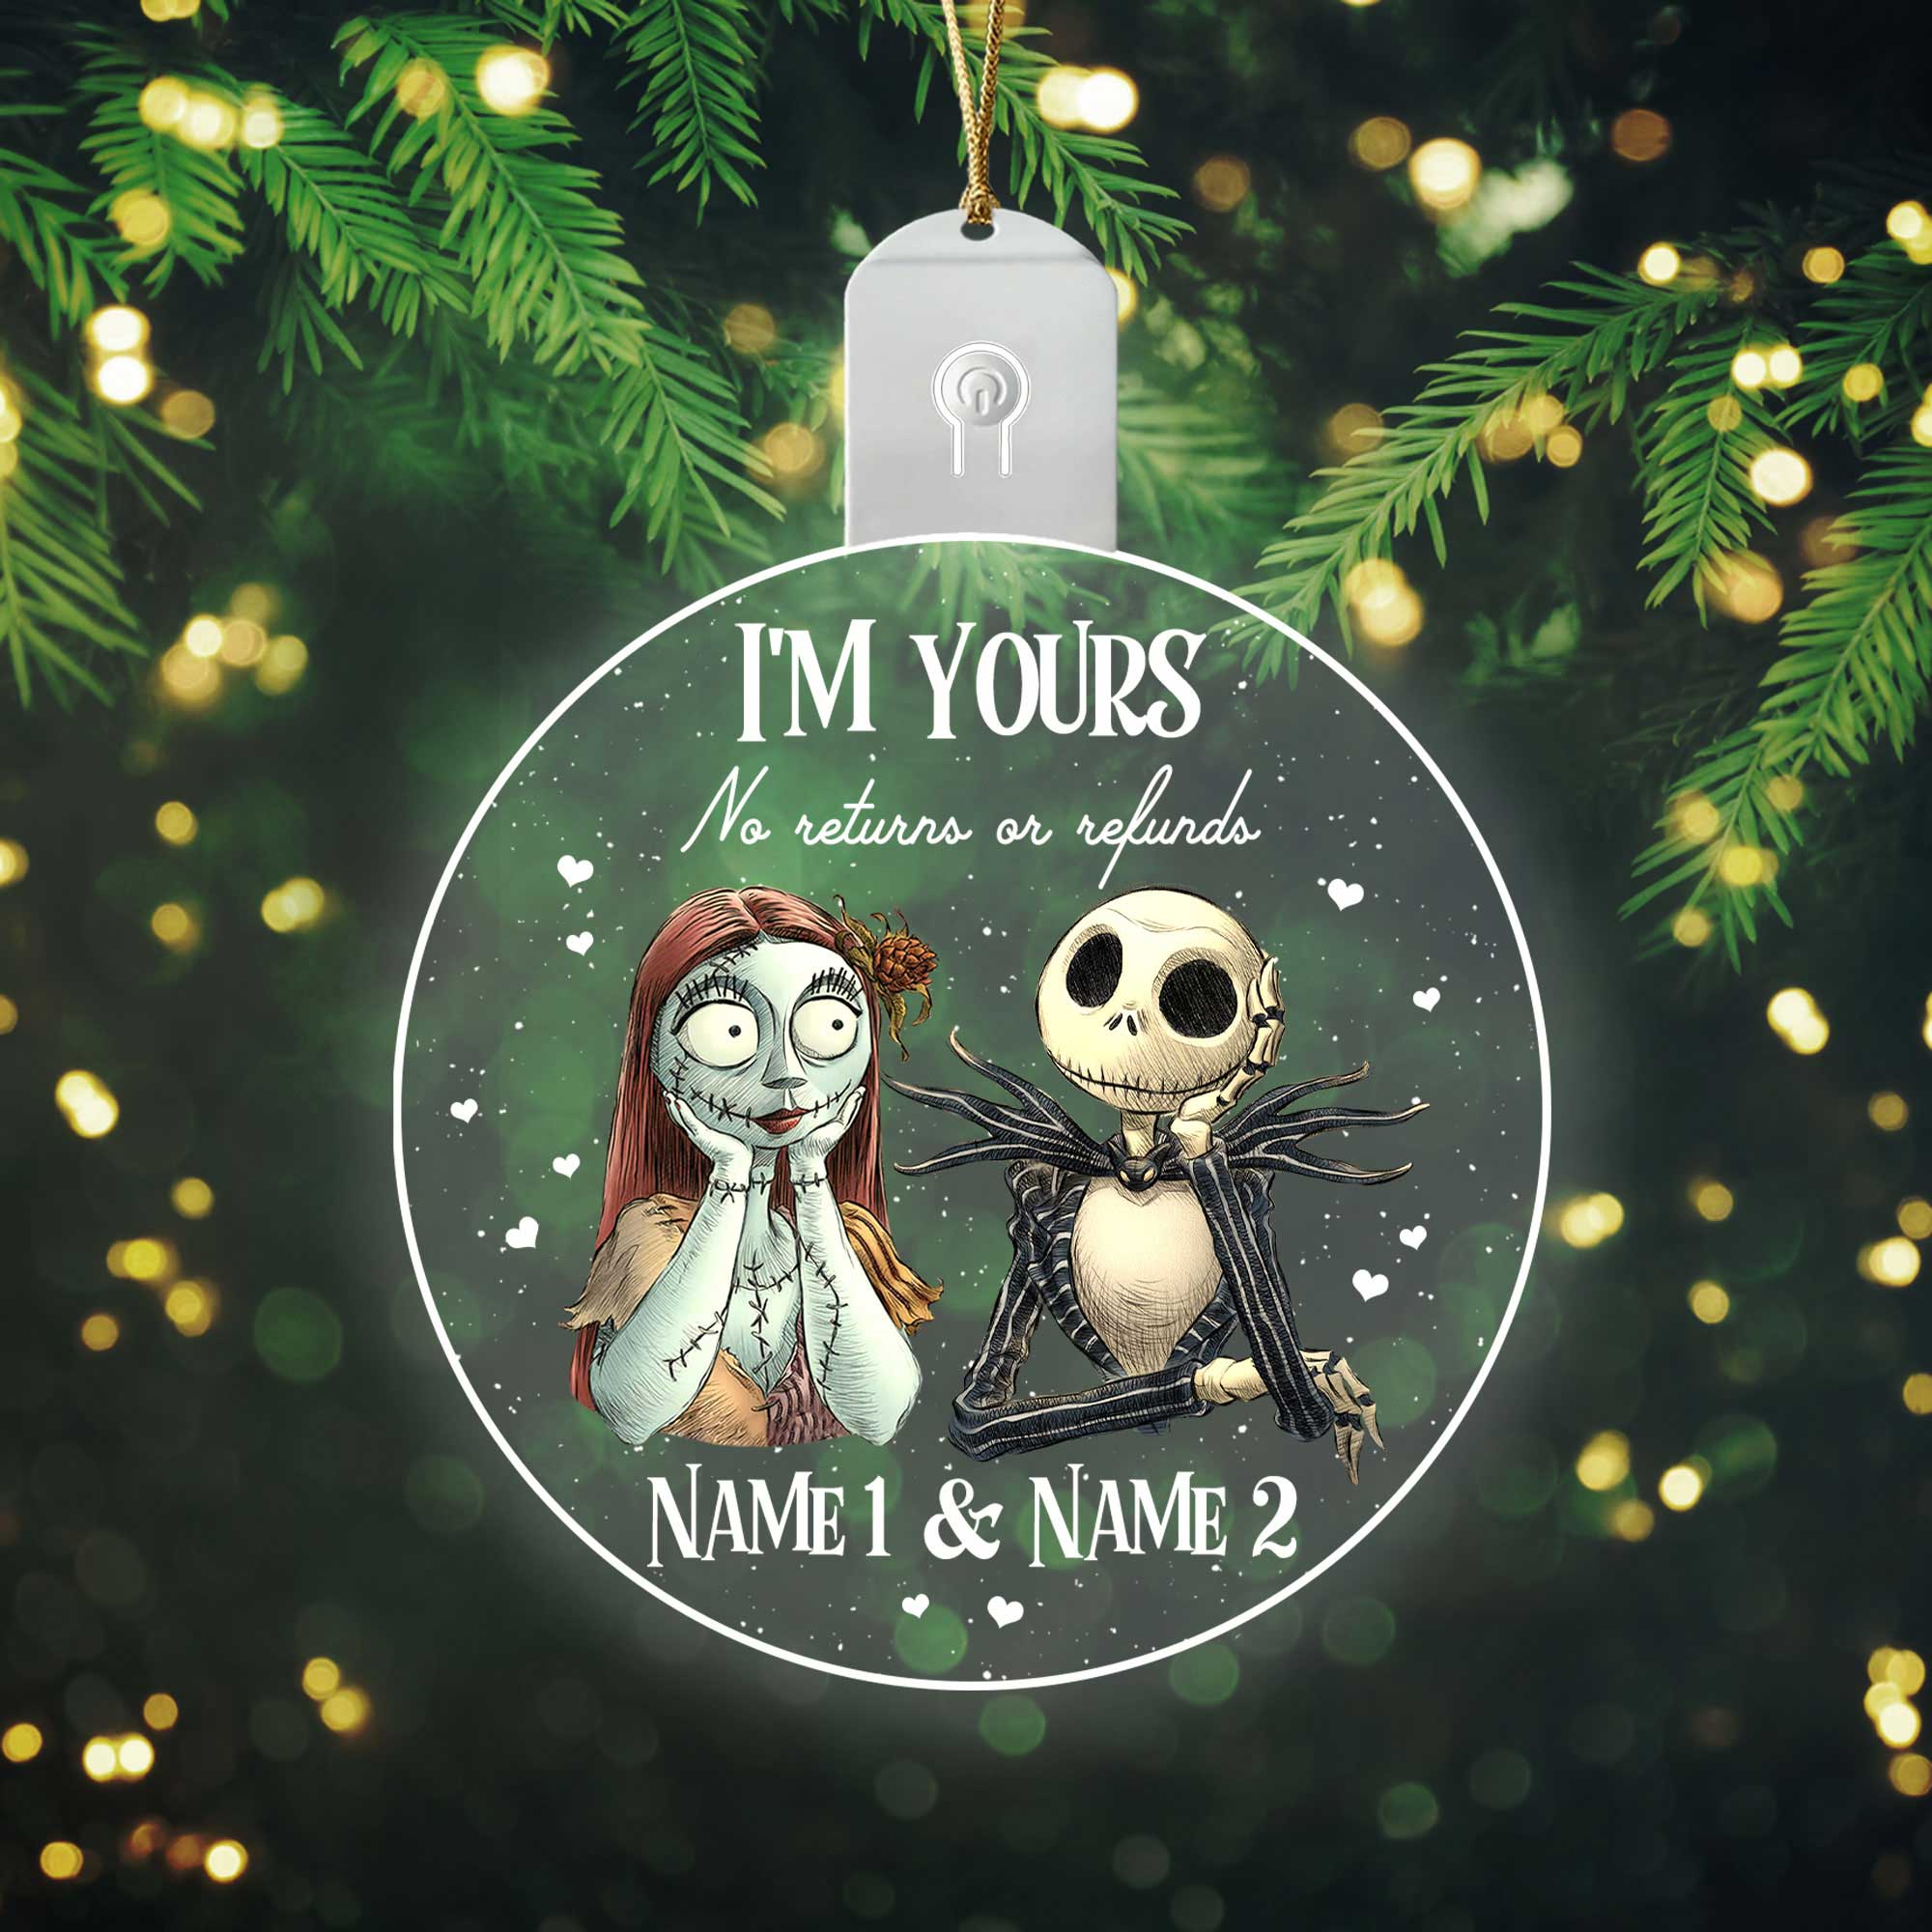 We're Simply Meant To Be - Personalized Christmas Nightmare Round Led Acrylic Ornament